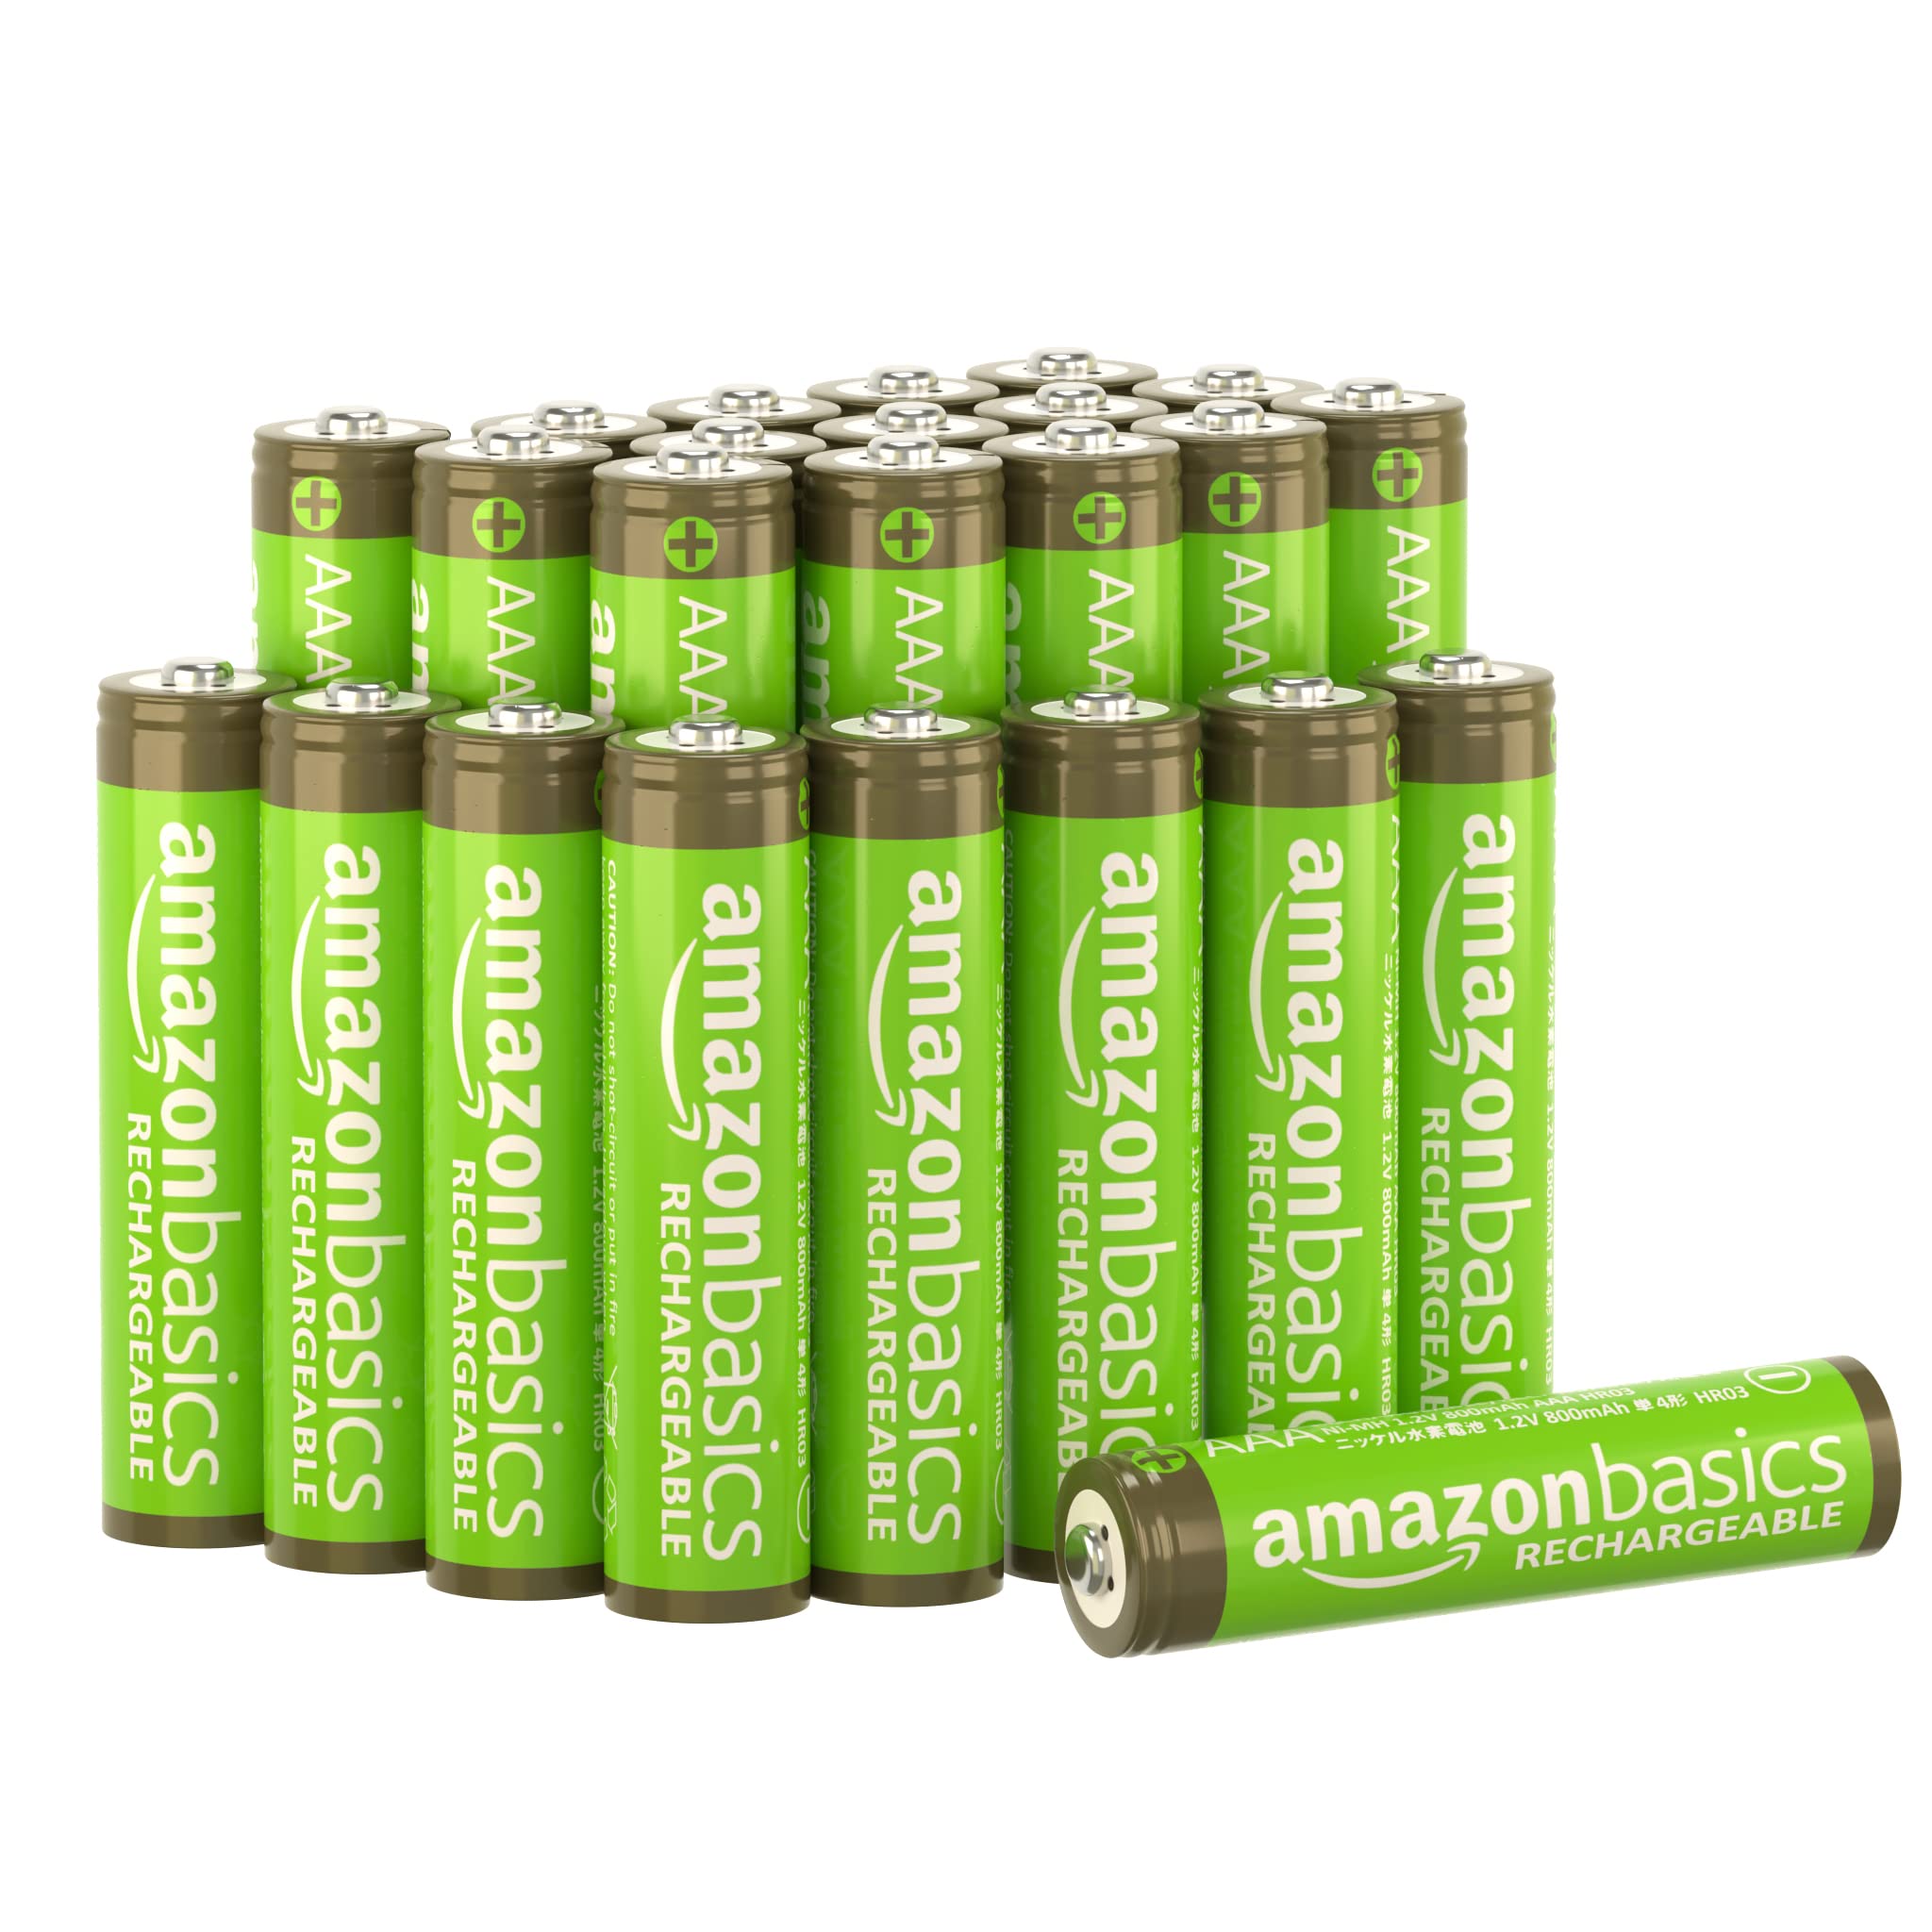 Amazon Basics 24-Pack Rechargeable AAA NiMh Performance Batteries, 800 mAh, Recharge up to 1000x Times, Pre-Charged